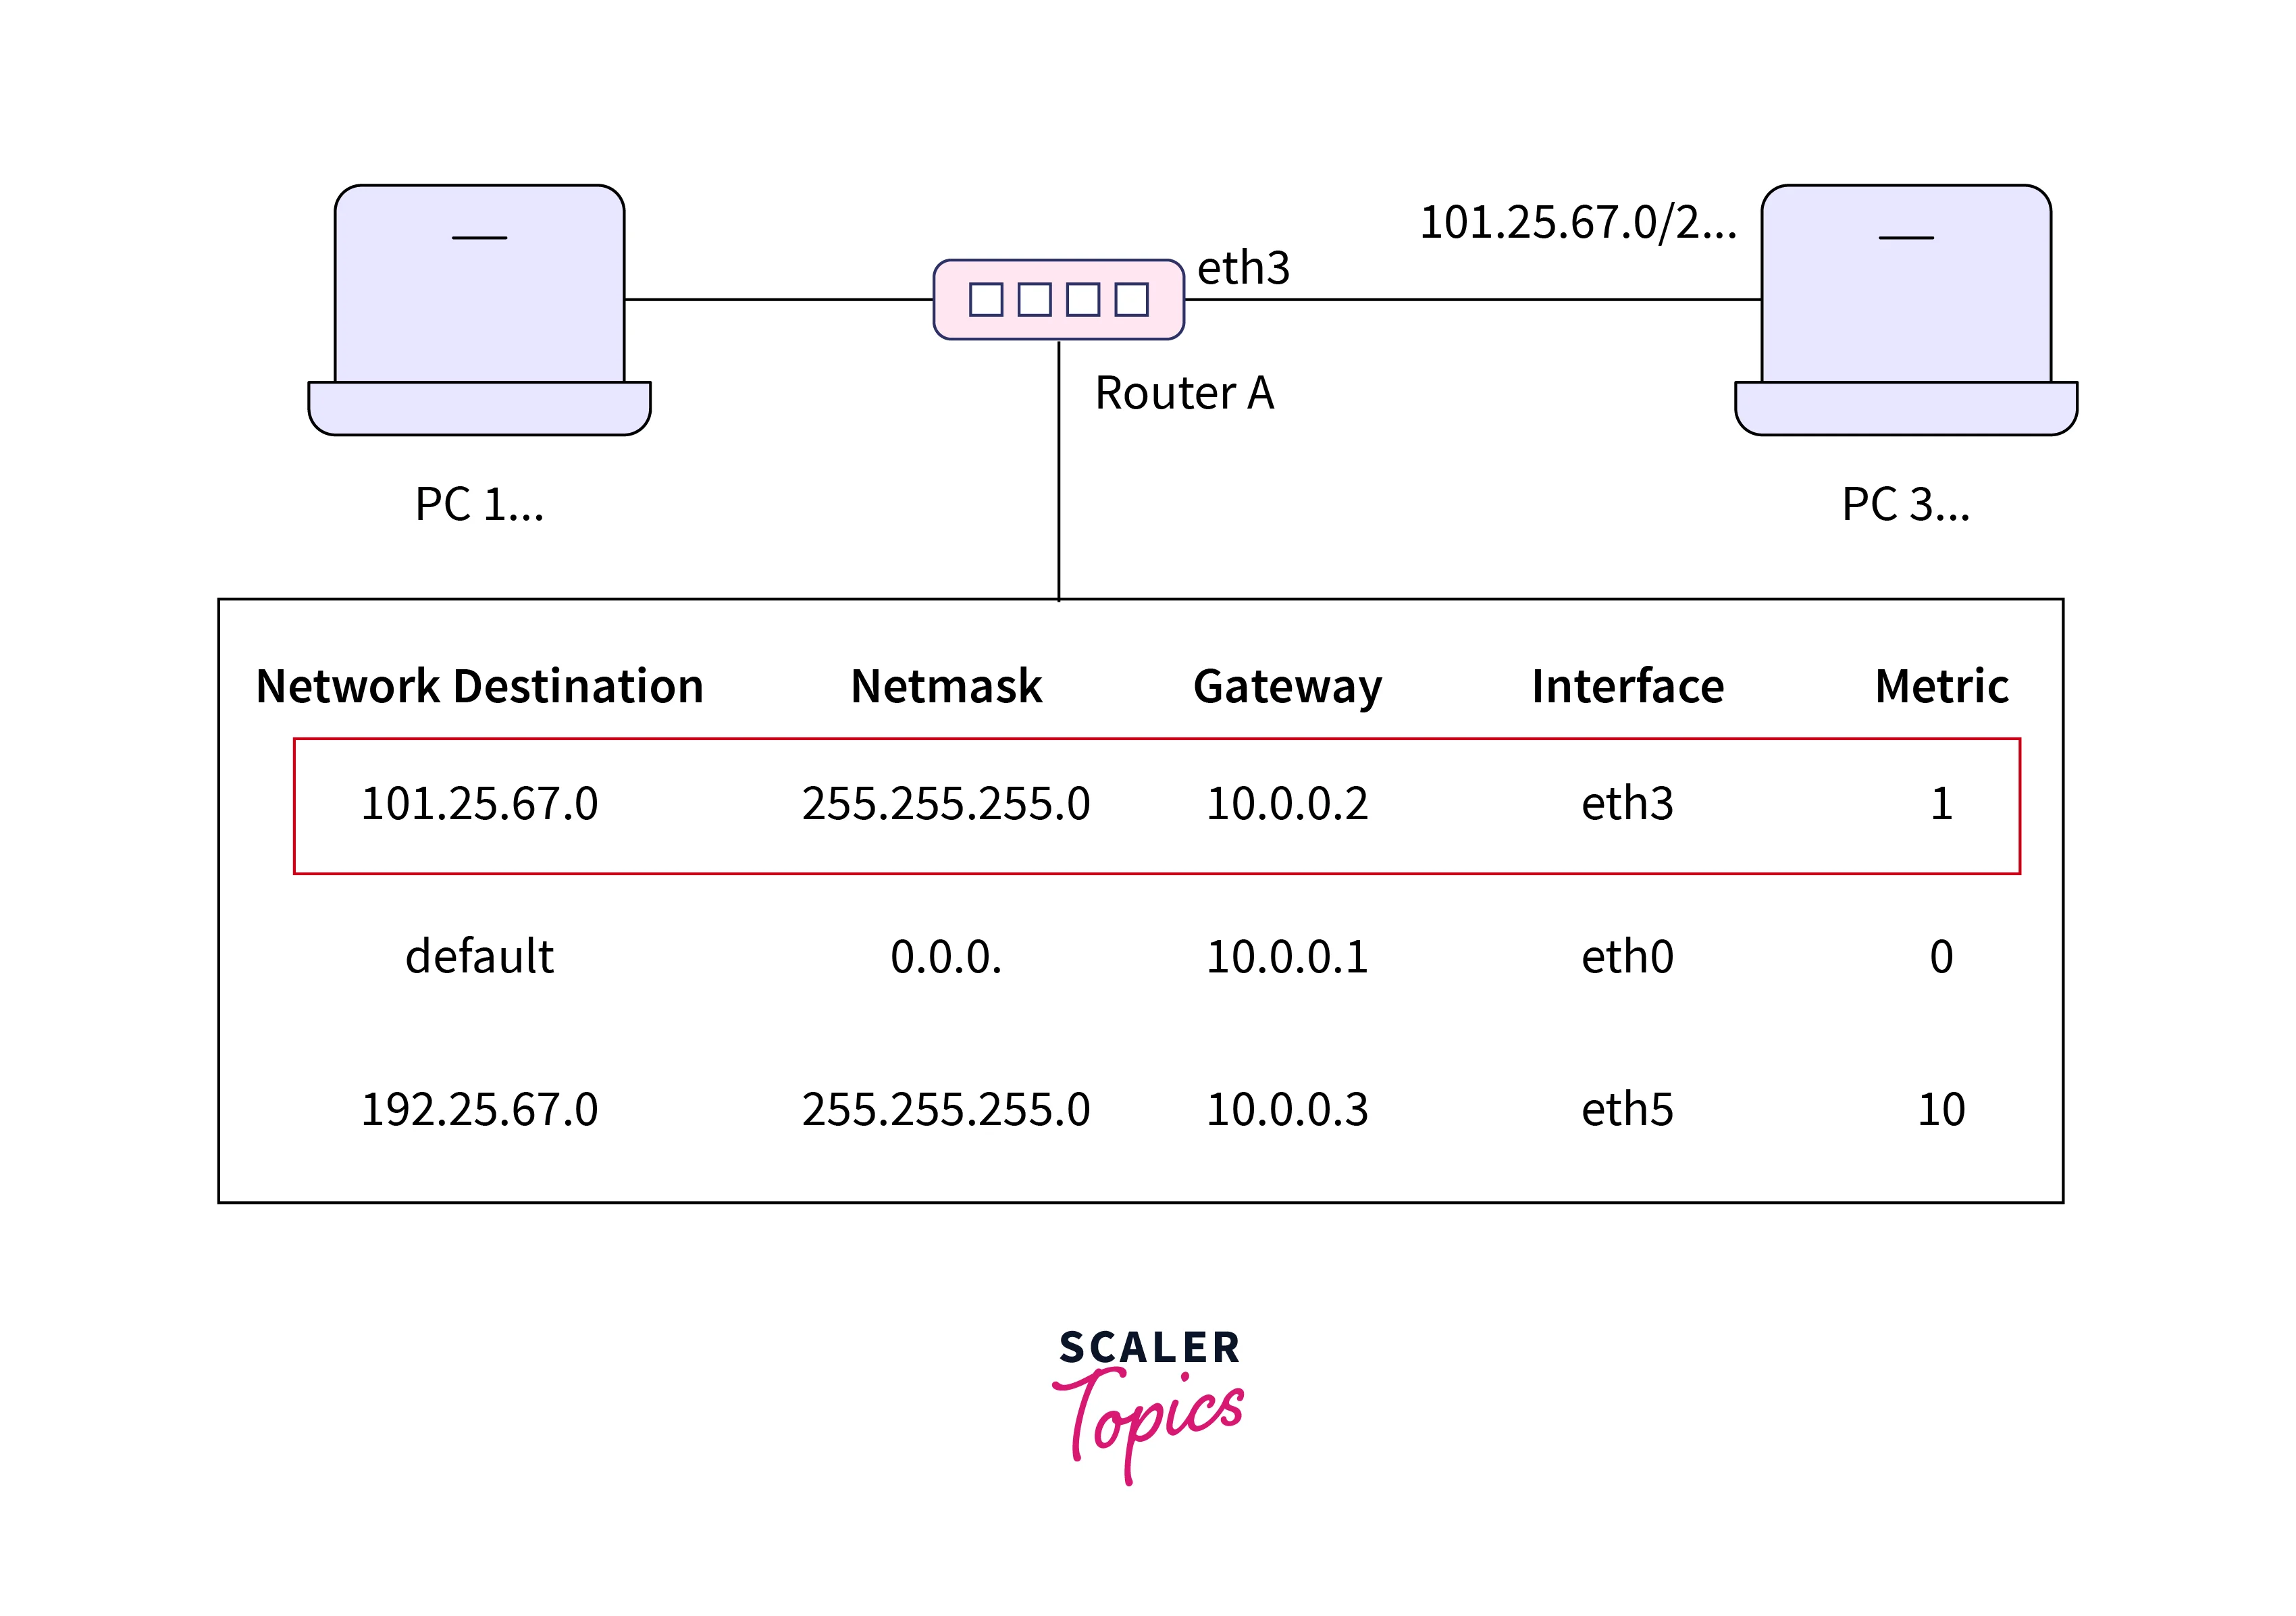 Routing Table - Scaler Topics